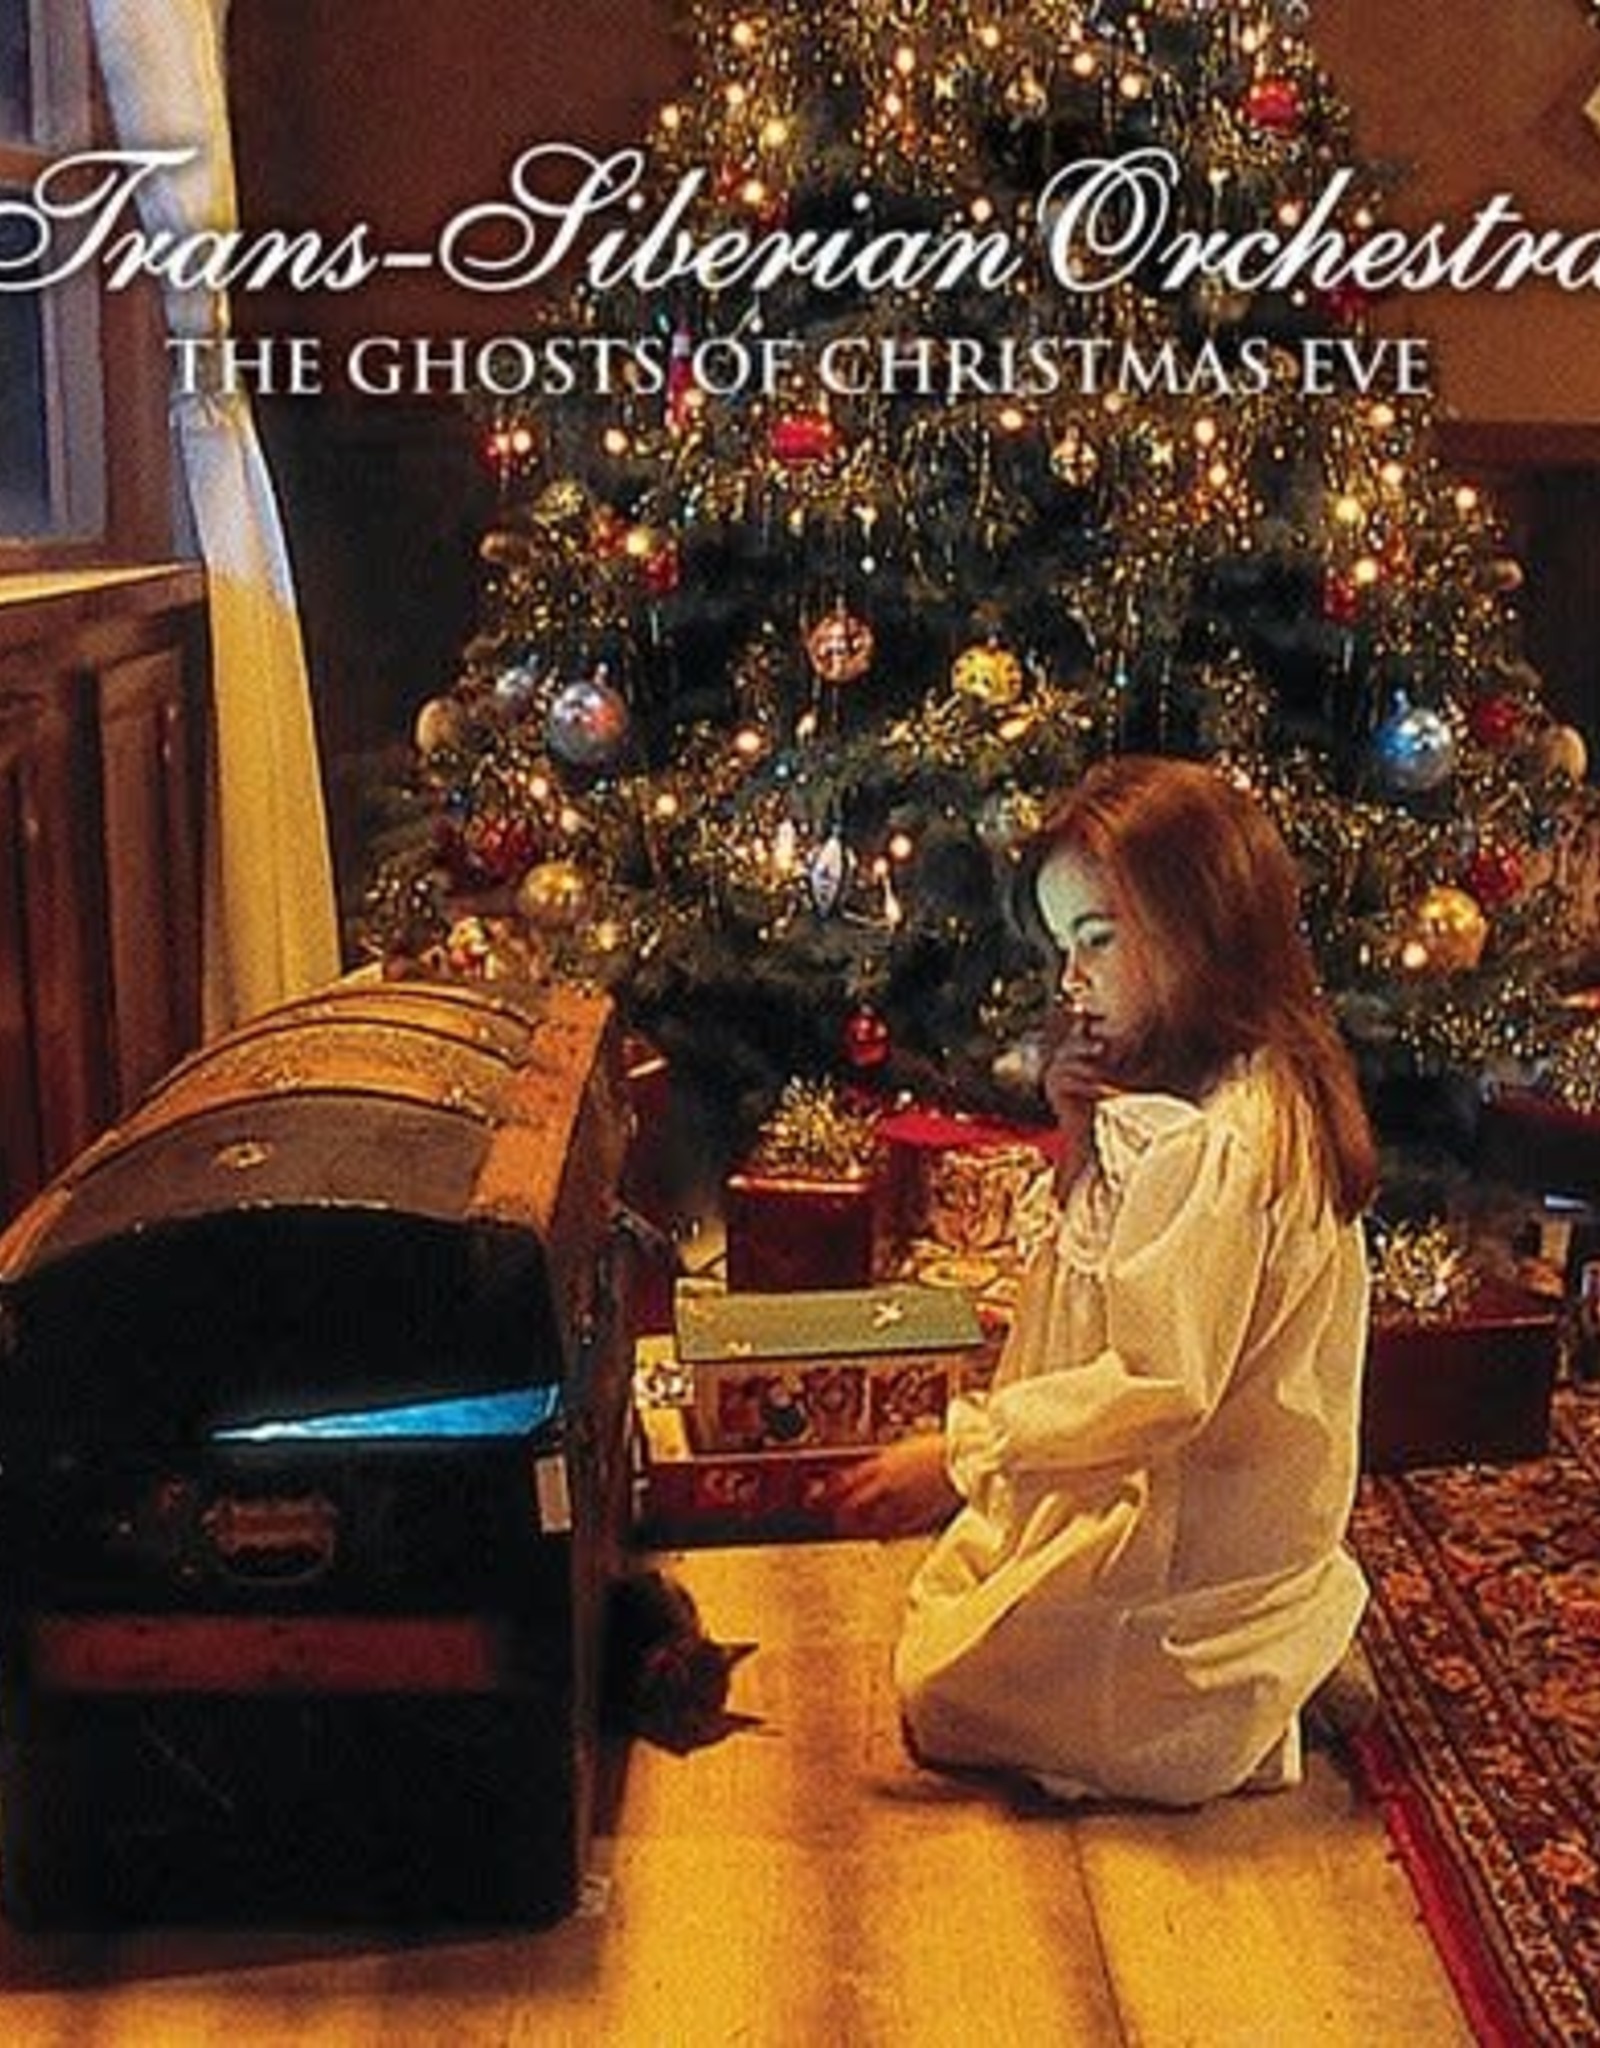 Trans-Siberian Orchestra - Ghosts of Christmas Eve (White Vinyl)